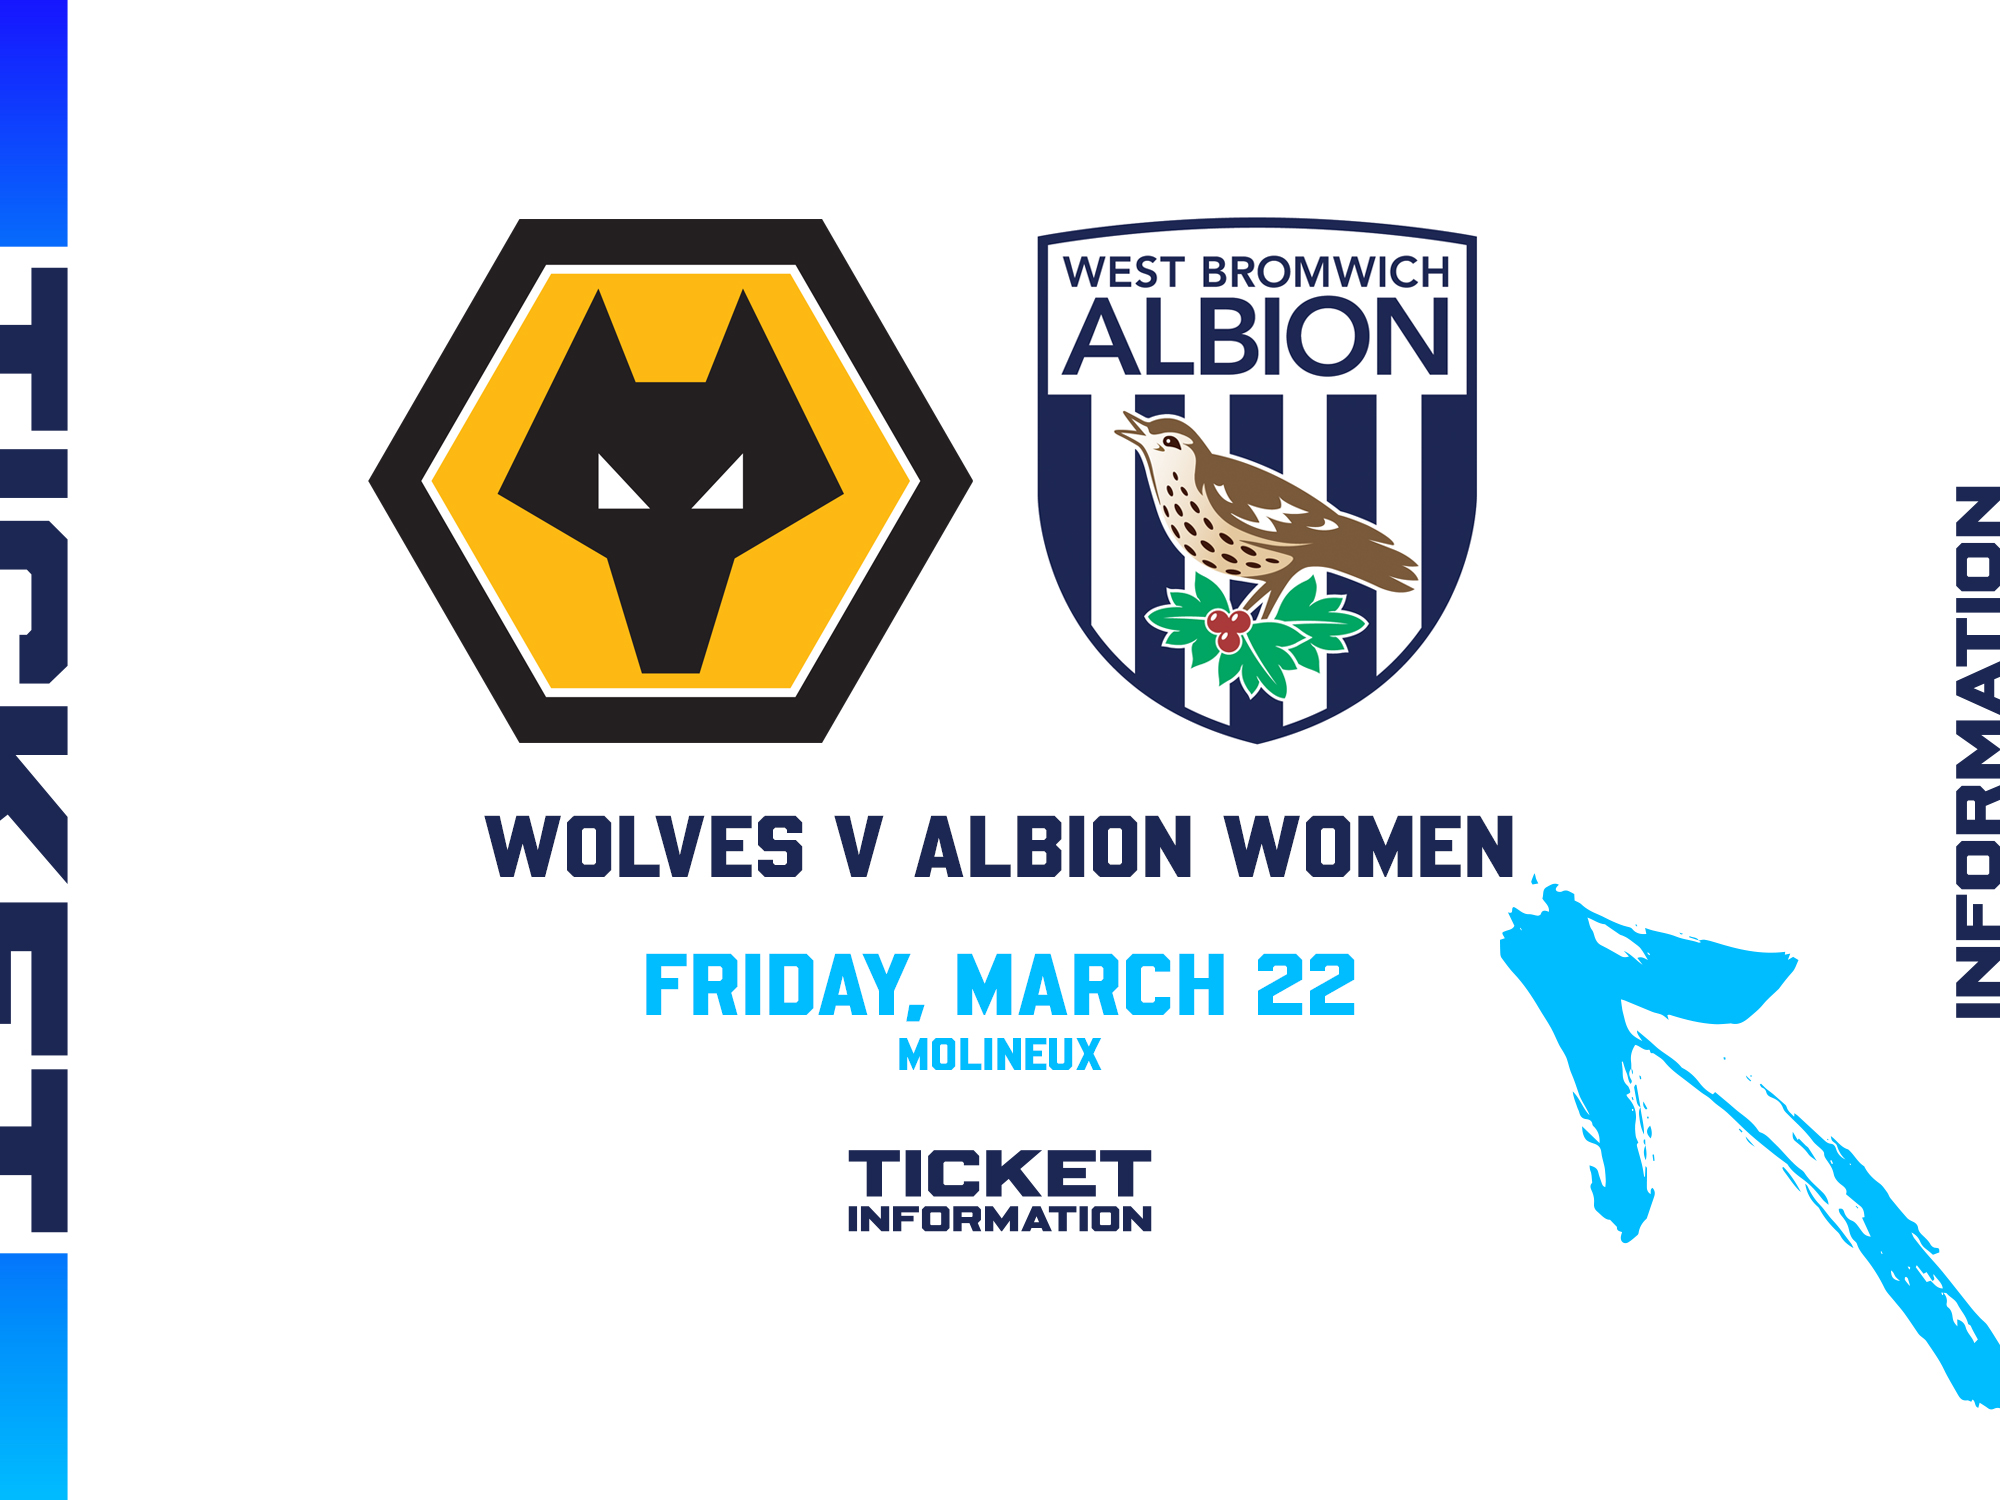 A ticket graphic displaying information for Albion Women's game at Wolves